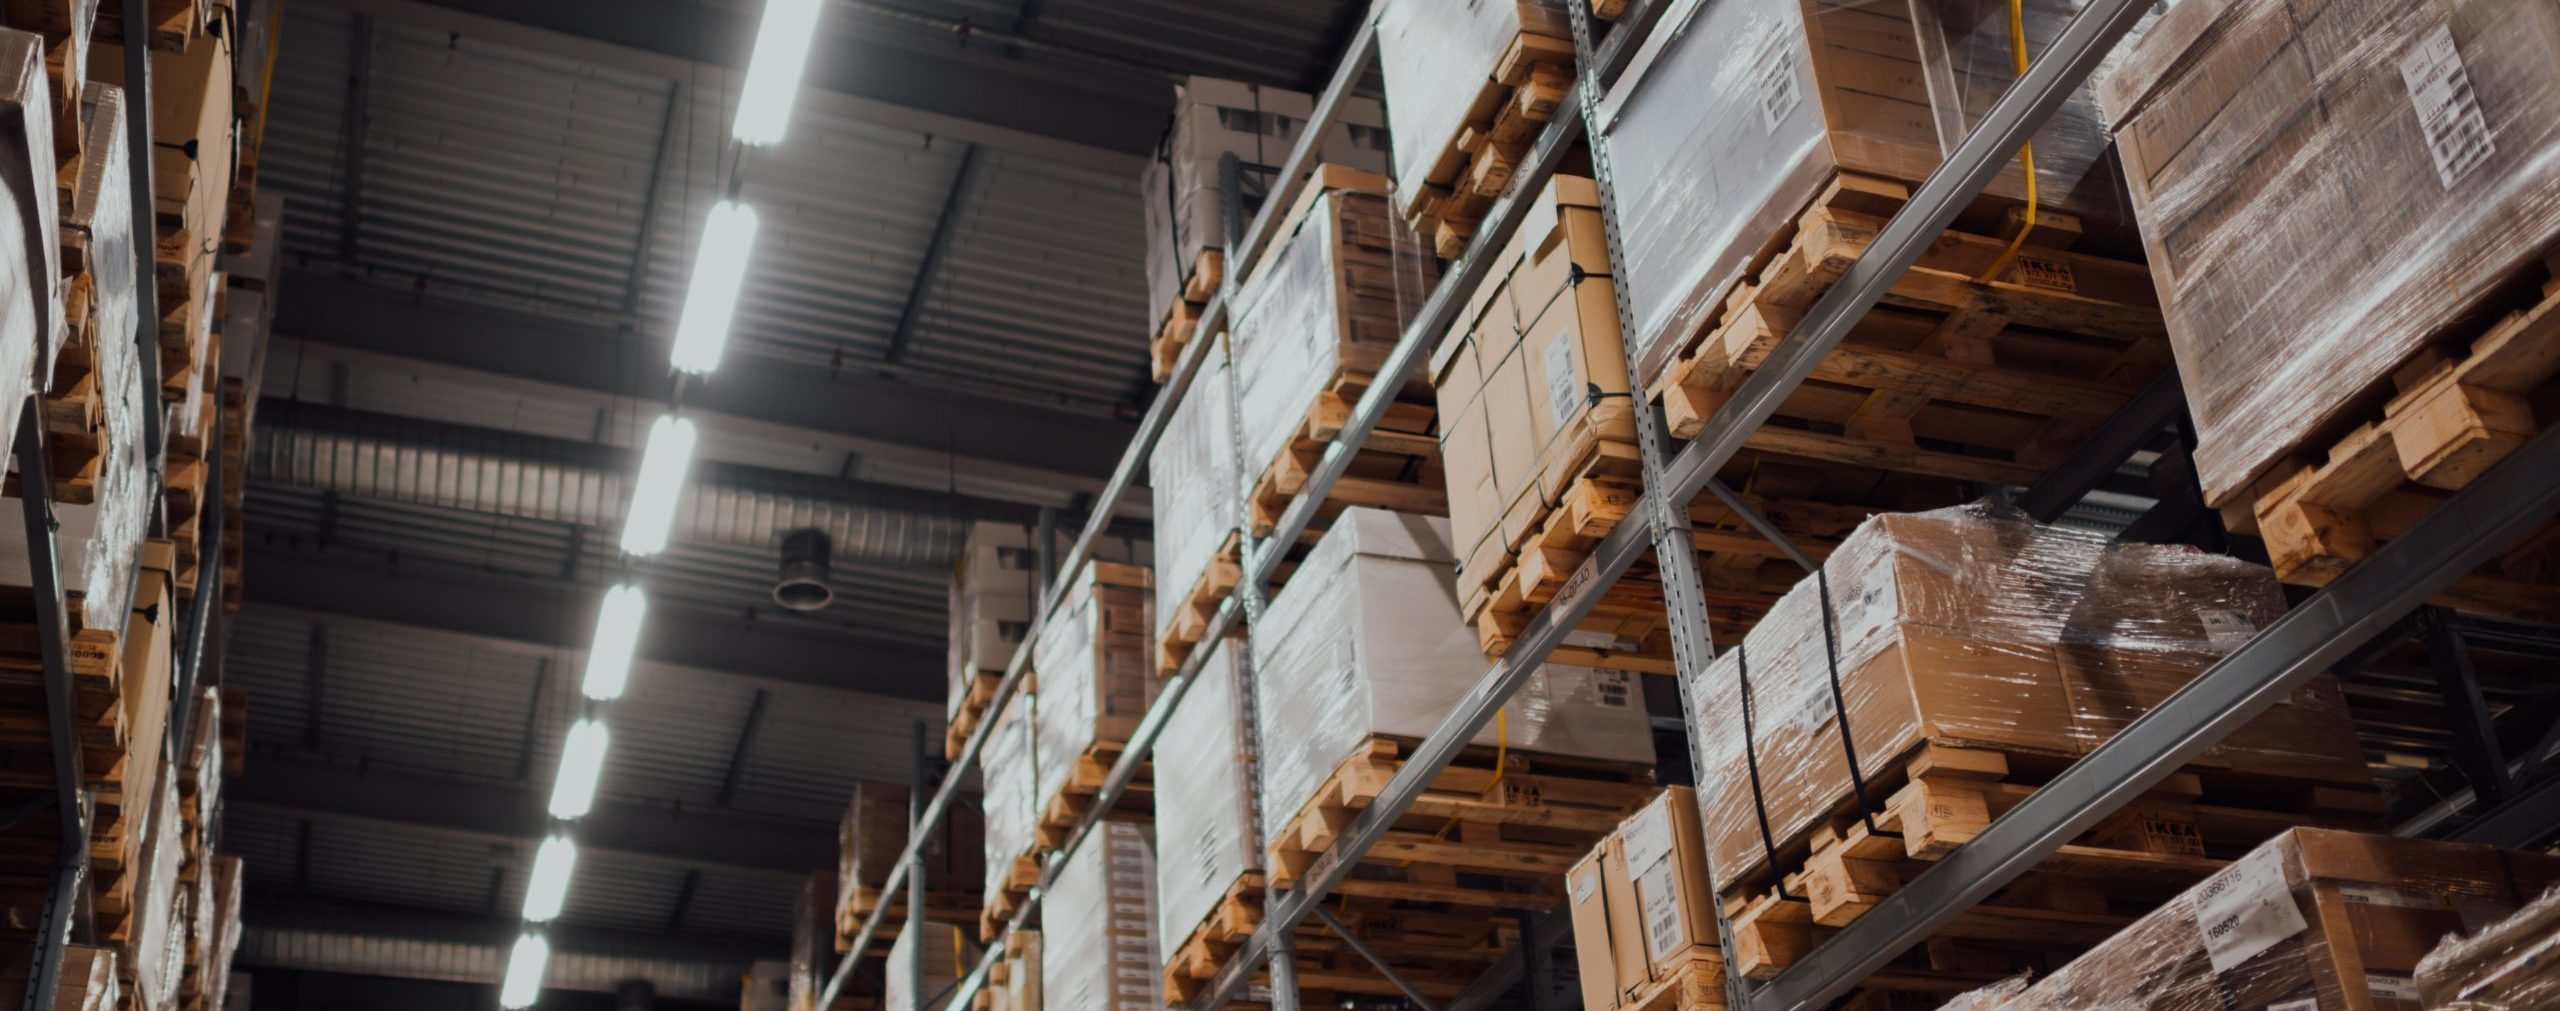 Discover the potential of your inventory through smart supply chain planning